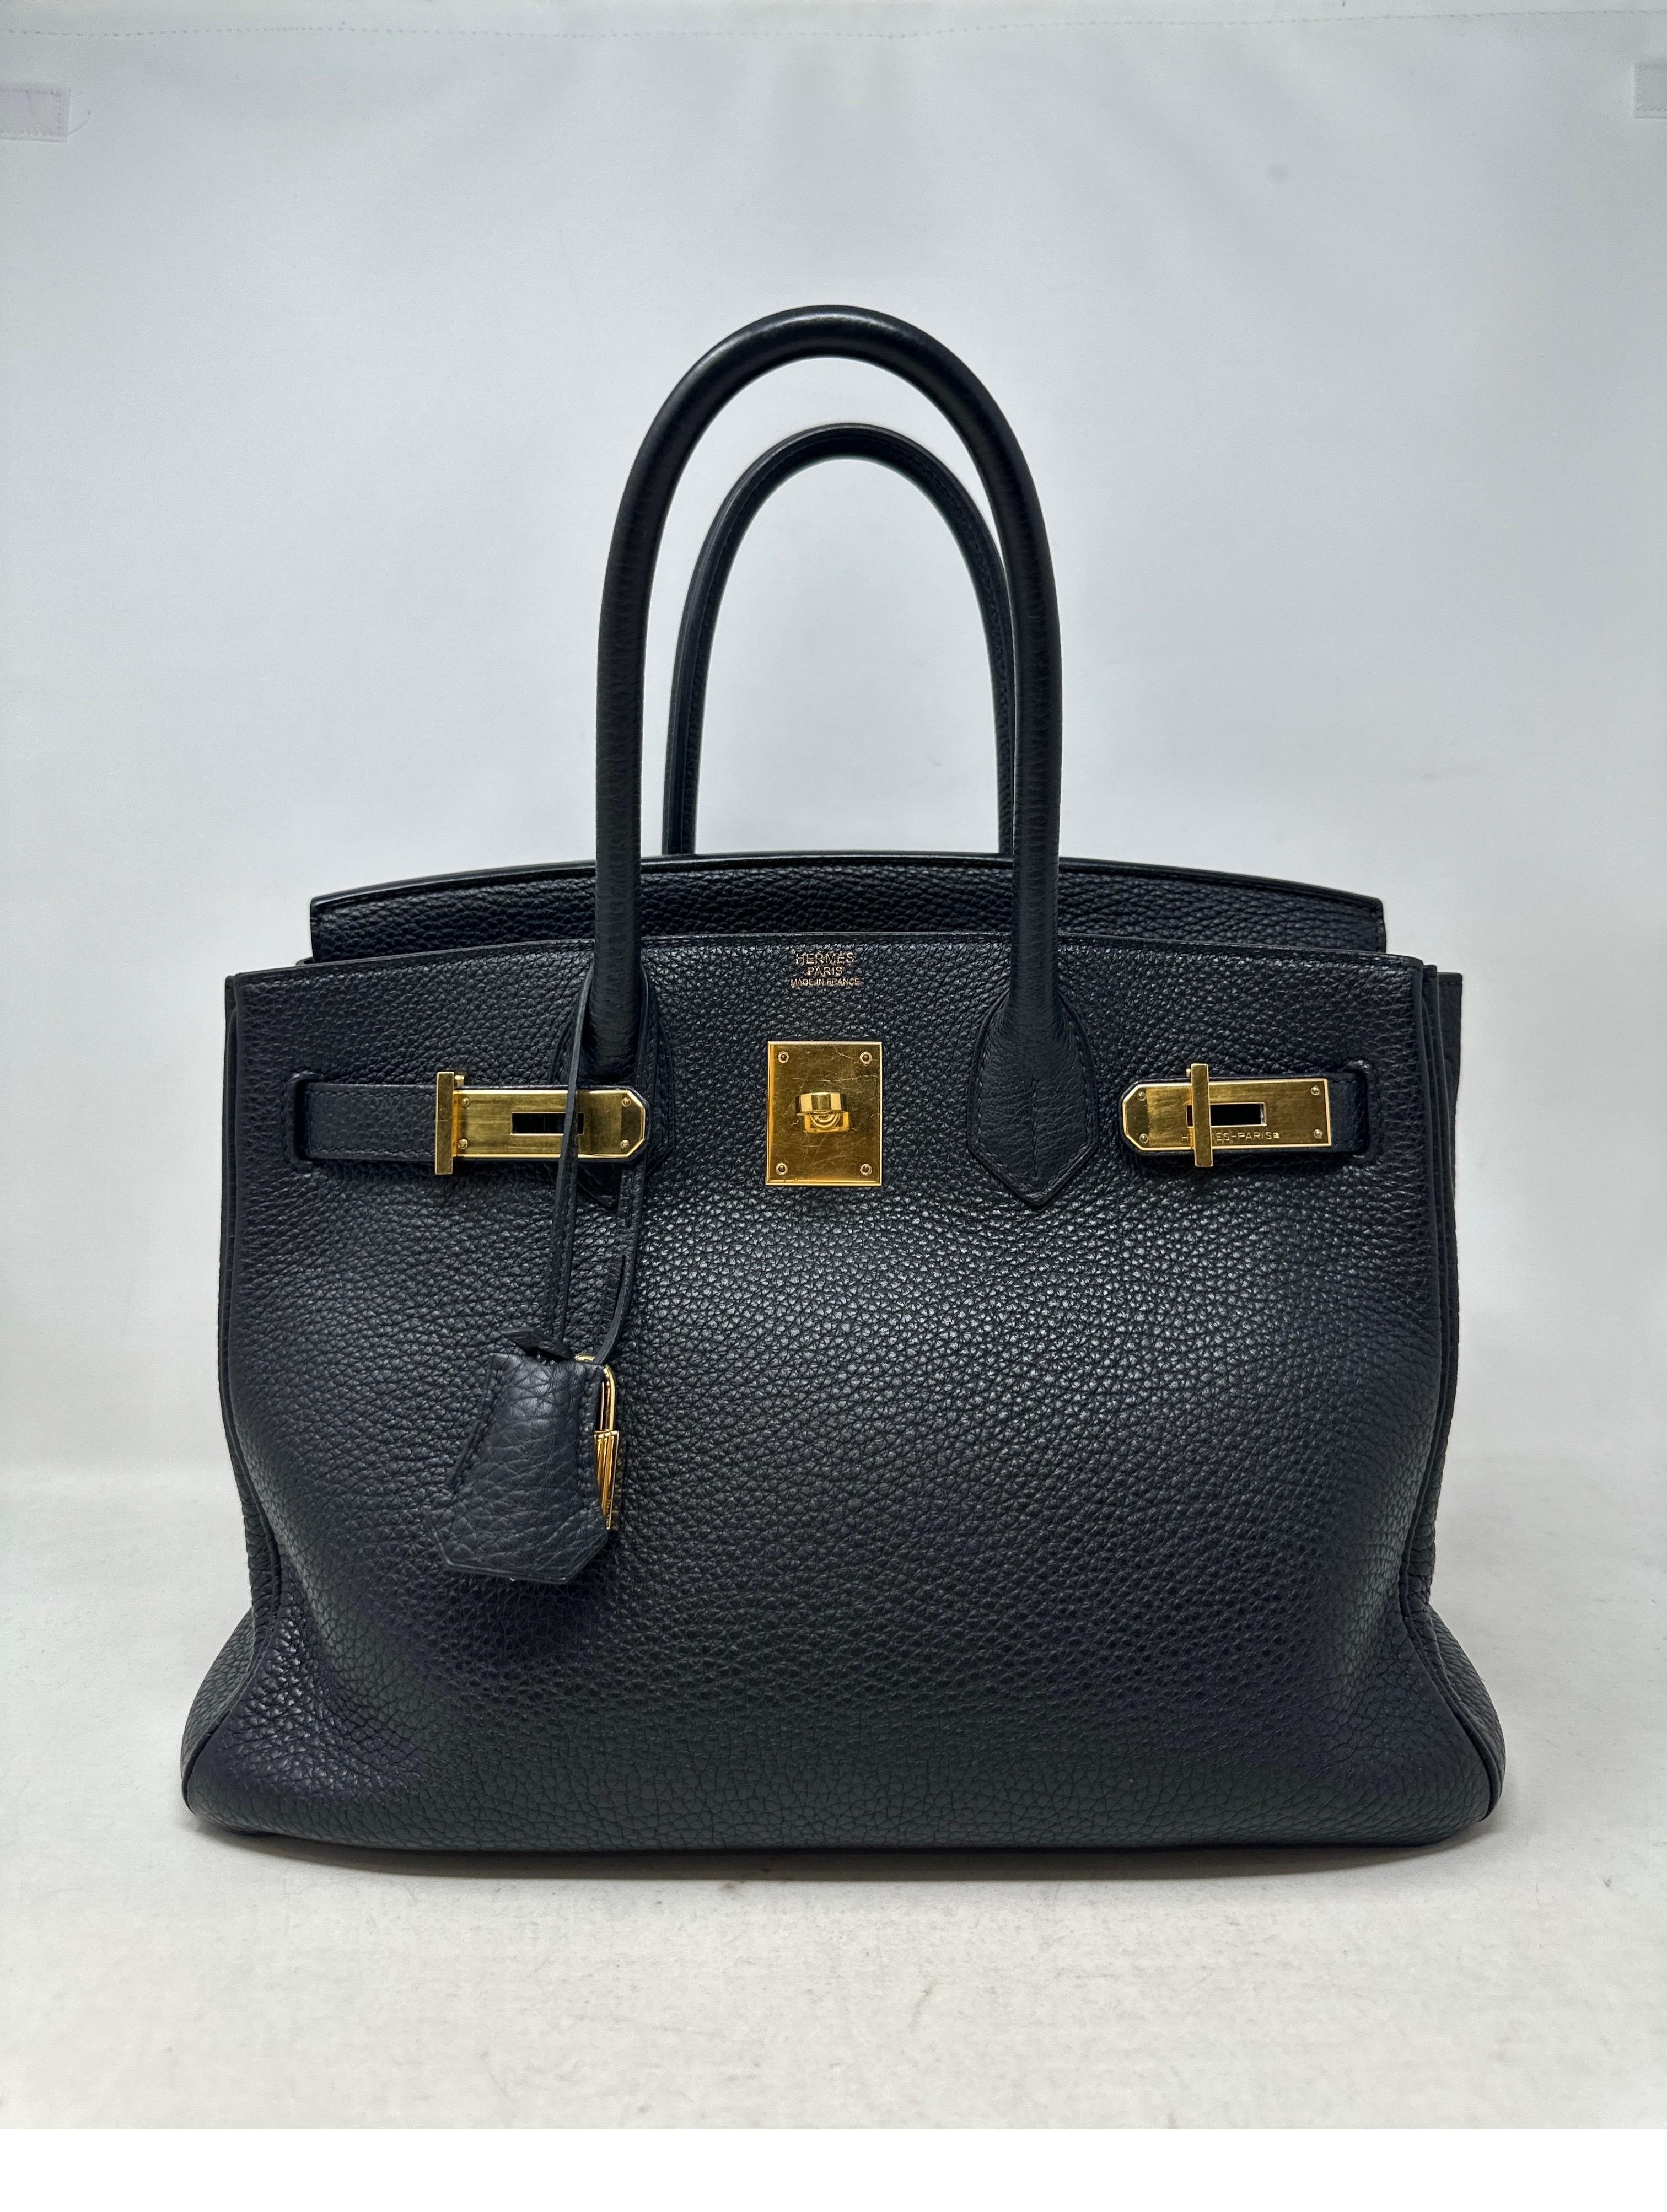 Hermes Black Birkin 30 Bag. Good condition. Gold hardware. Interior clean. Togo leather. Includes clochette, lock, keys, and dust bag. Classic black with most wanted size 30. Highly desired combination. Includes clochette, lock, keys, and dust bag.